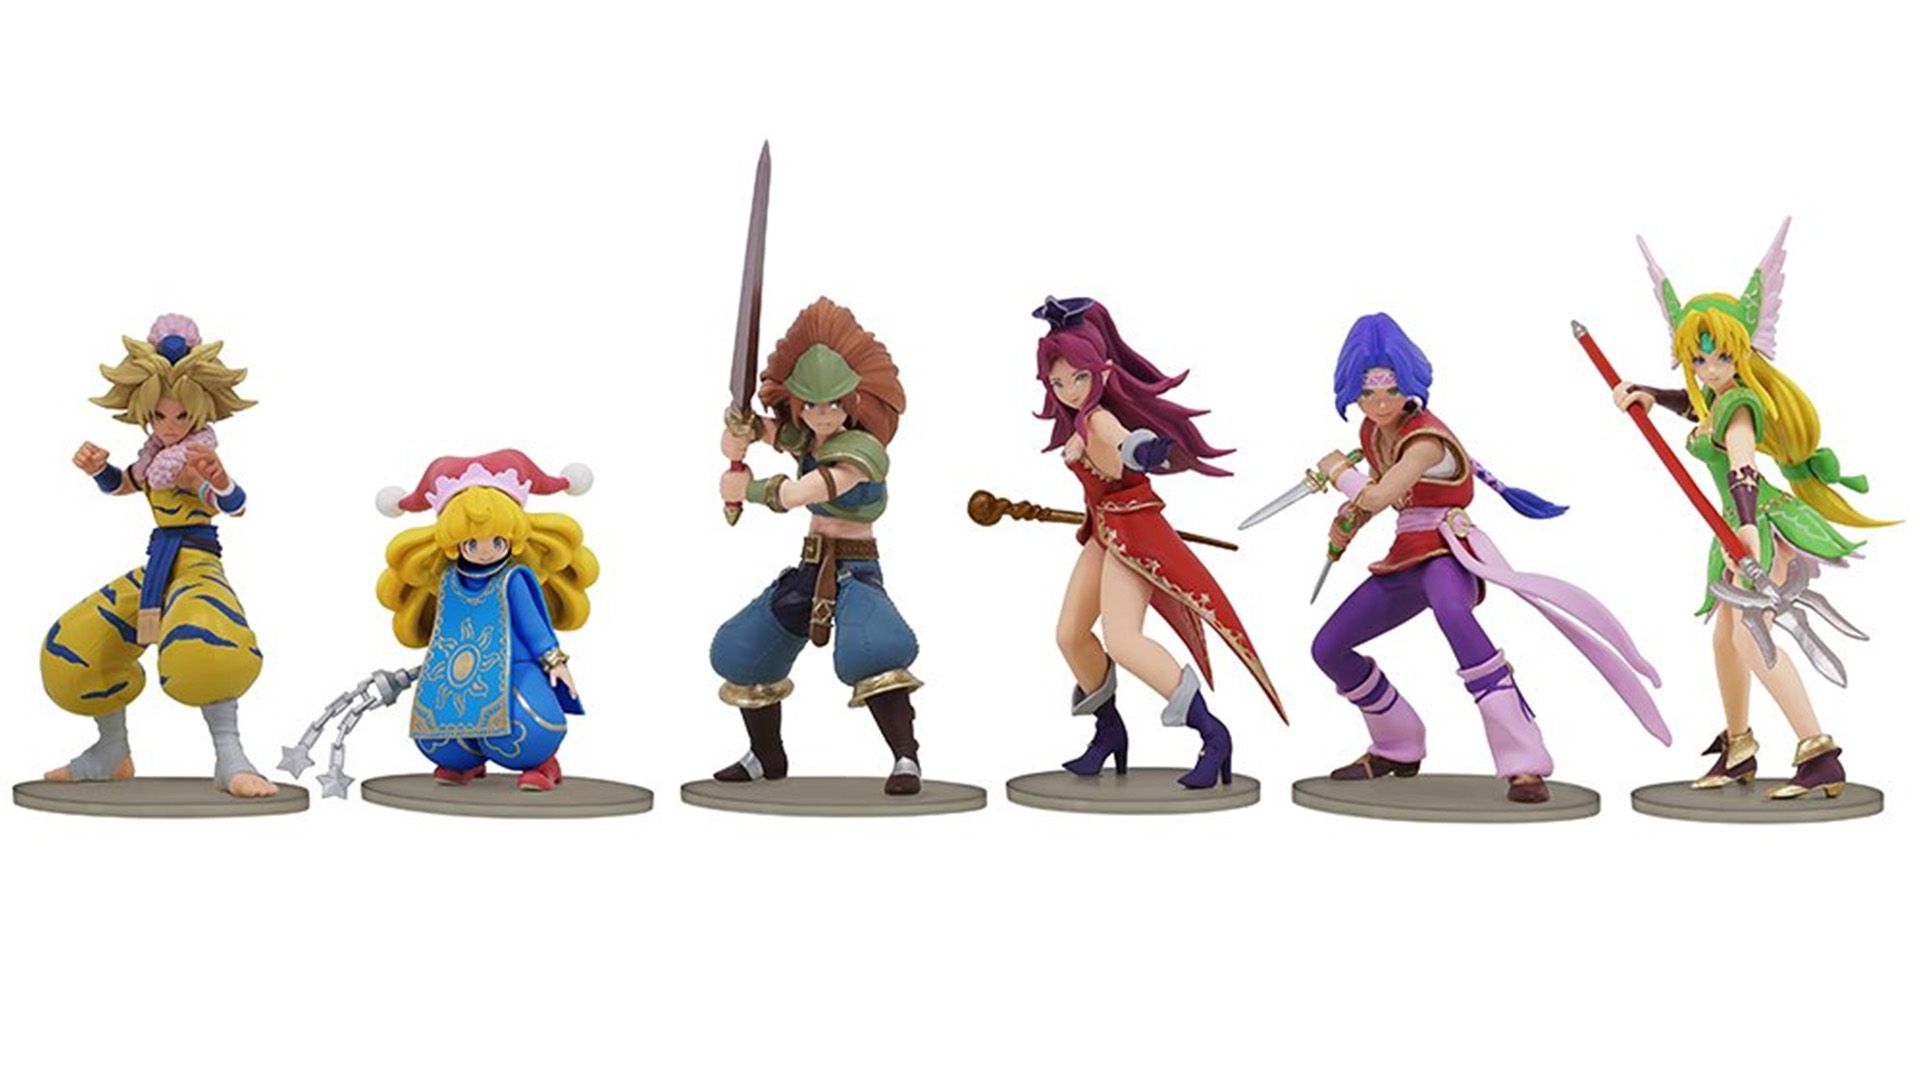 Trials of Mana six figure set confirmed for North America